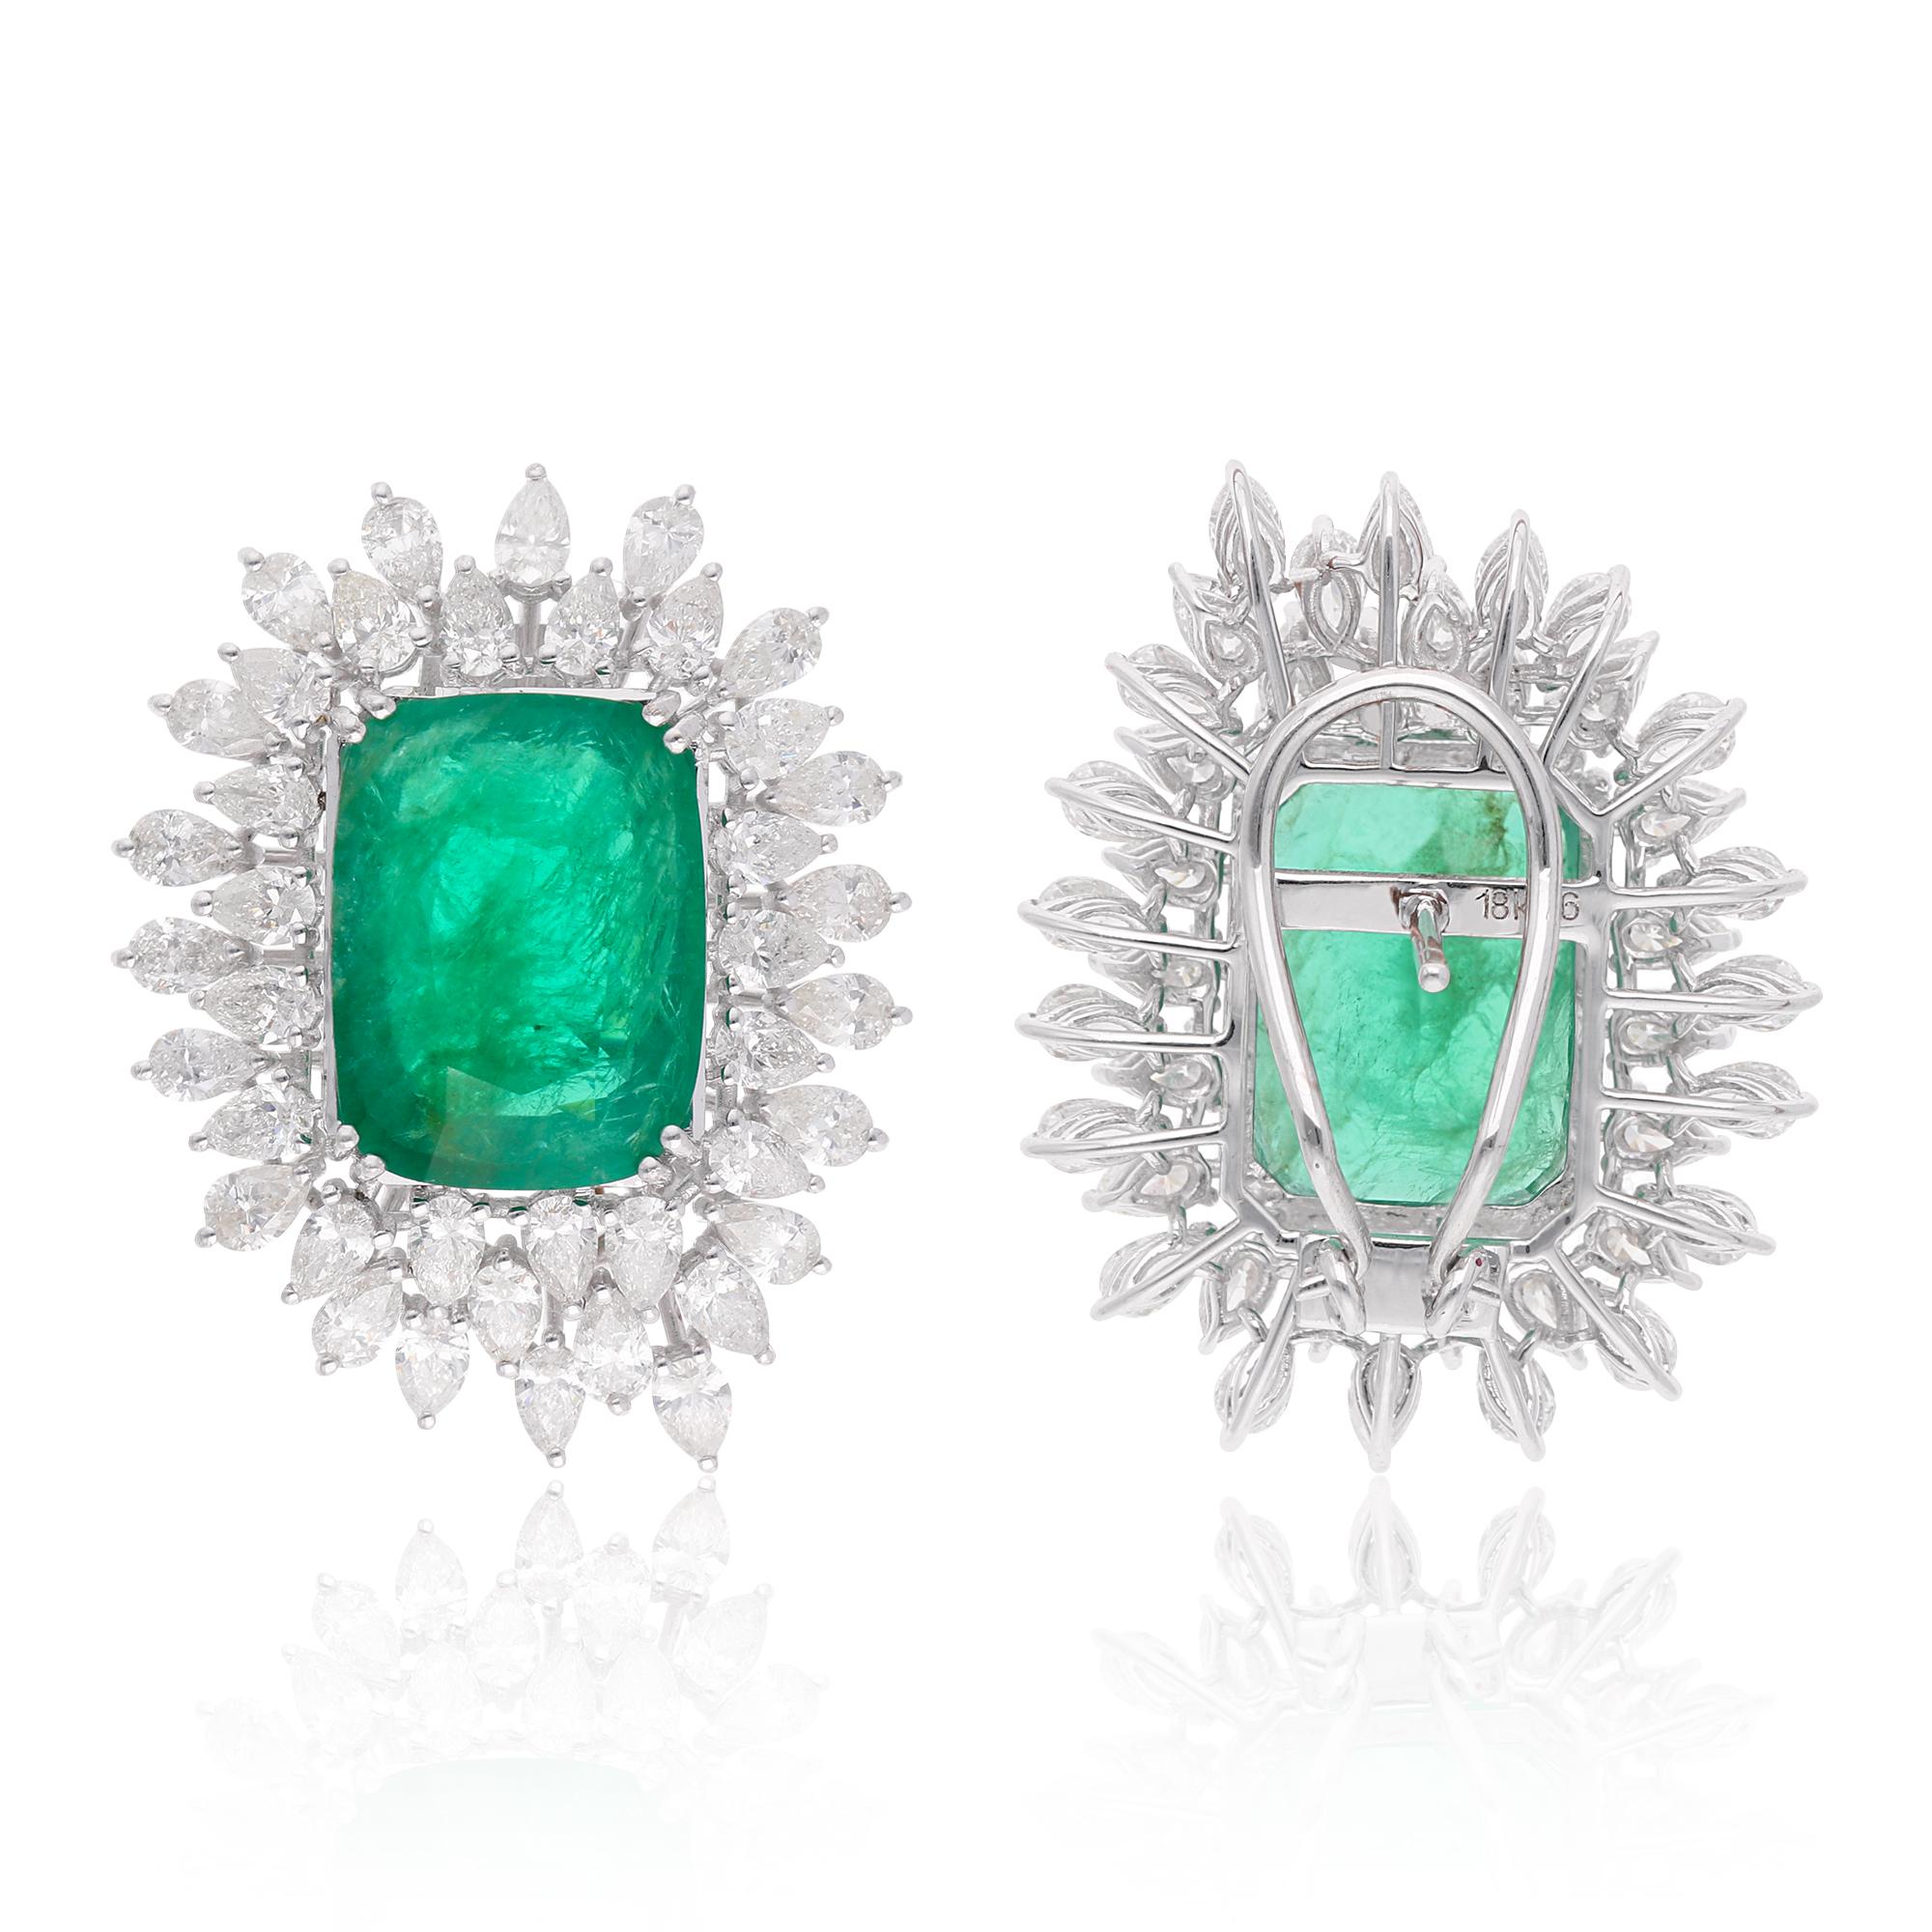 Bring a touch of glamour to your day with these beautiful Emerald & Diamond Art Deco earrings. The studs are made with 18k solid white gold with Lever Back closure.

This is a perfect Gift for Mom, Fiancée, Daughter, Girlfriend, Wife and